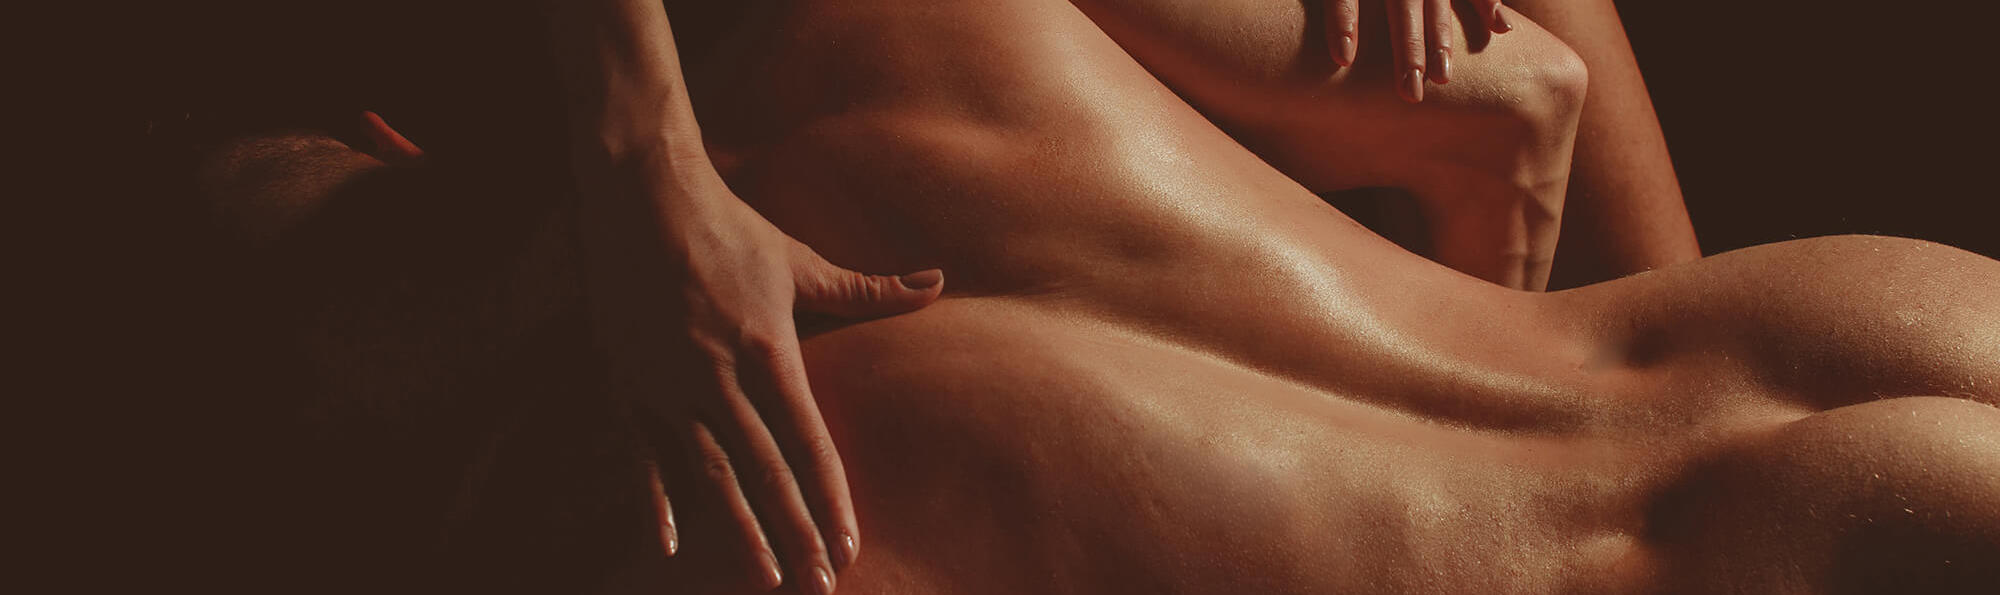 An Erotic Spa is Not Just Sex Work